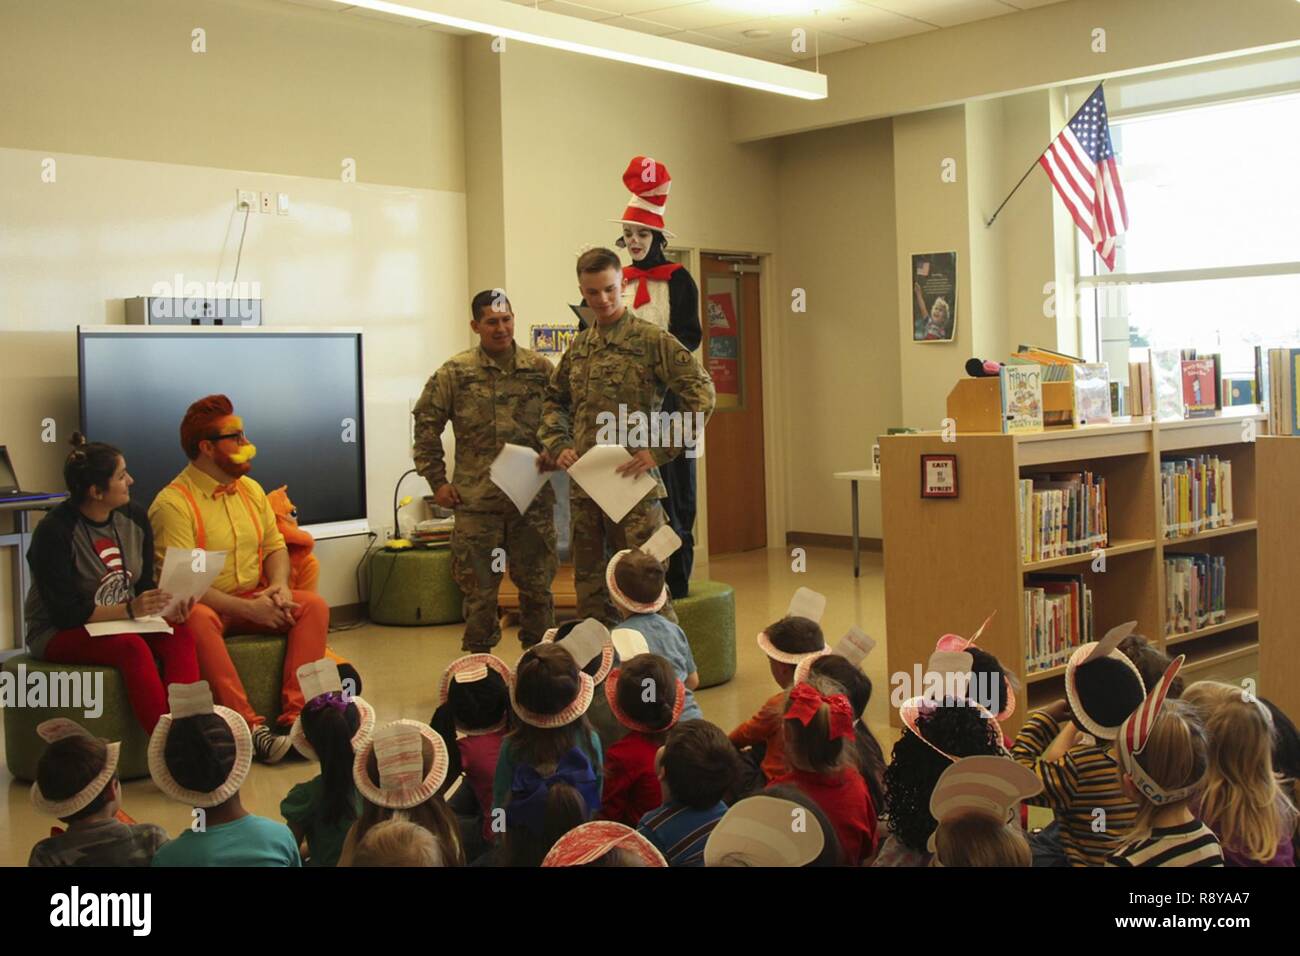 Two Soldiers from the 716th Military Police Battalion, 101st Airborne Division (Air Assault) Sustainment Brigade, 101st Abn. Div., participate in a rehearsal of “The Cat in the Hat” production staff members of Marshall Elementary School put together for the students, March 2, 2017, at Marshall Elementary School on Fort Campbell, Kentucky. The school celebrated the 20th Anniversary of Read Across America by inviting soldiers from 716th MP Bn. To the school and putting the production for the students to encourage and promote reading. Stock Photo